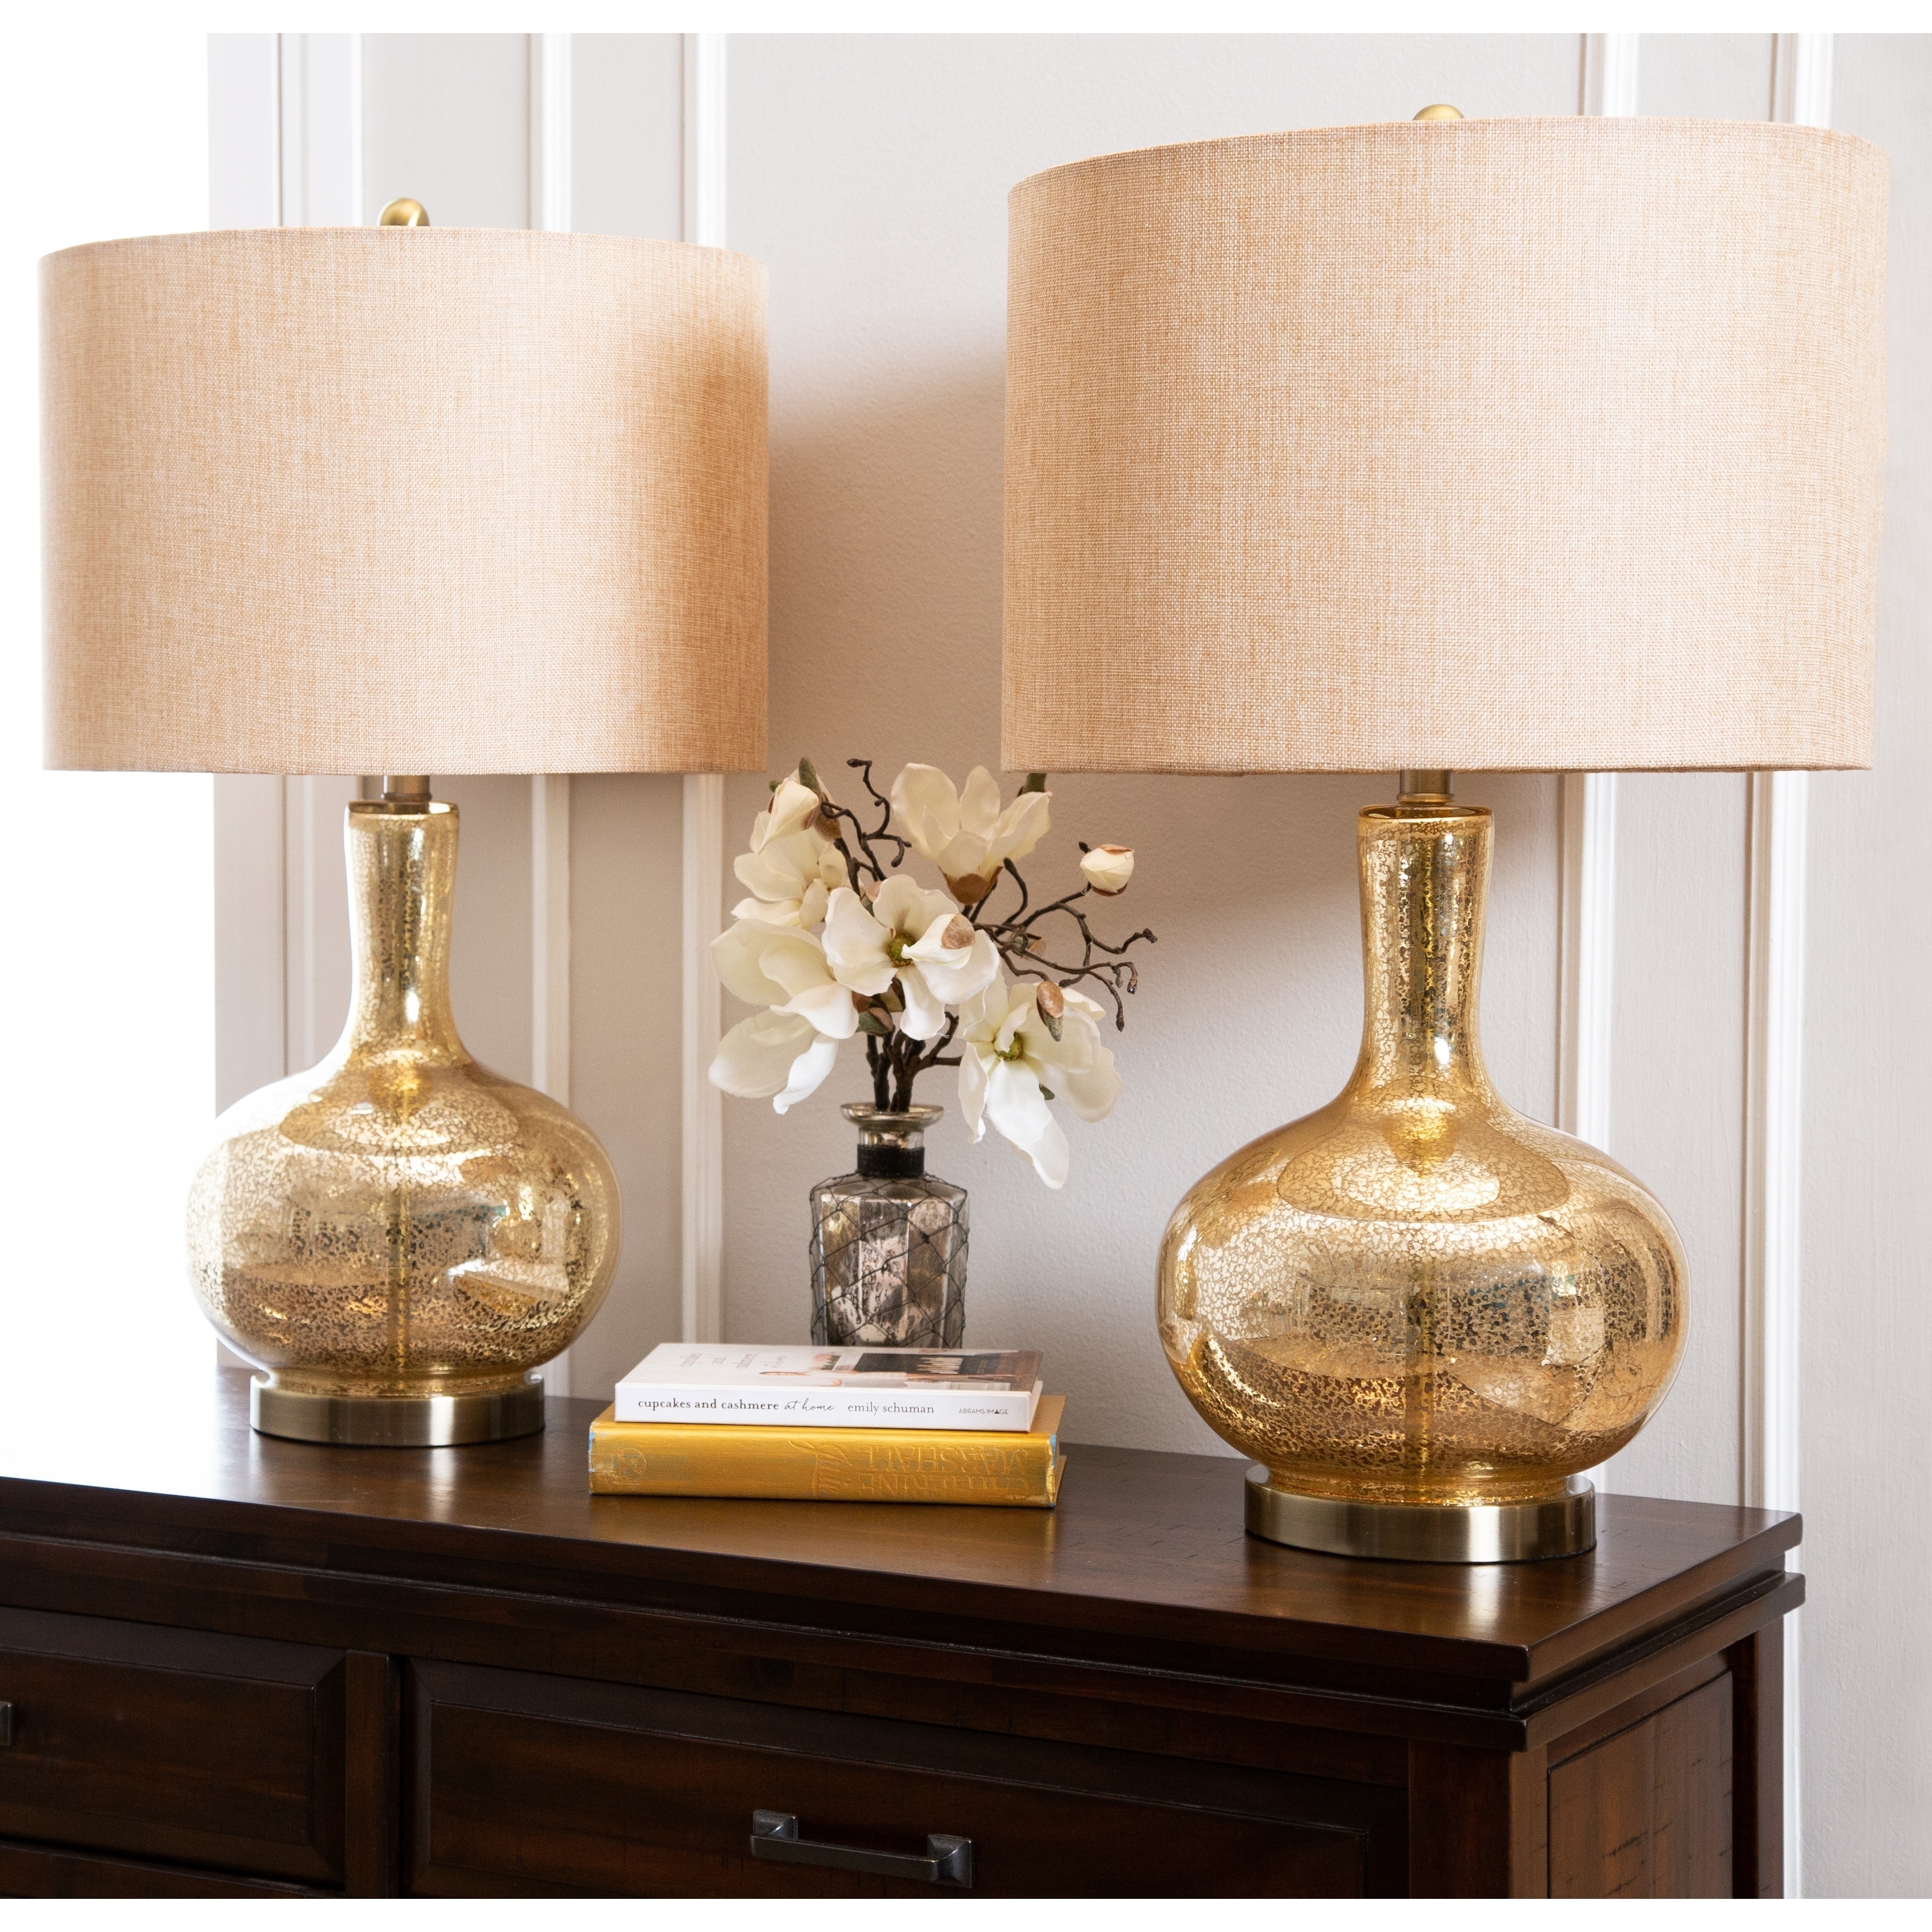 Gold Mercury Glass 25.5-inch Table Lamp (Set of 2) By Gold 28.75"H x 16